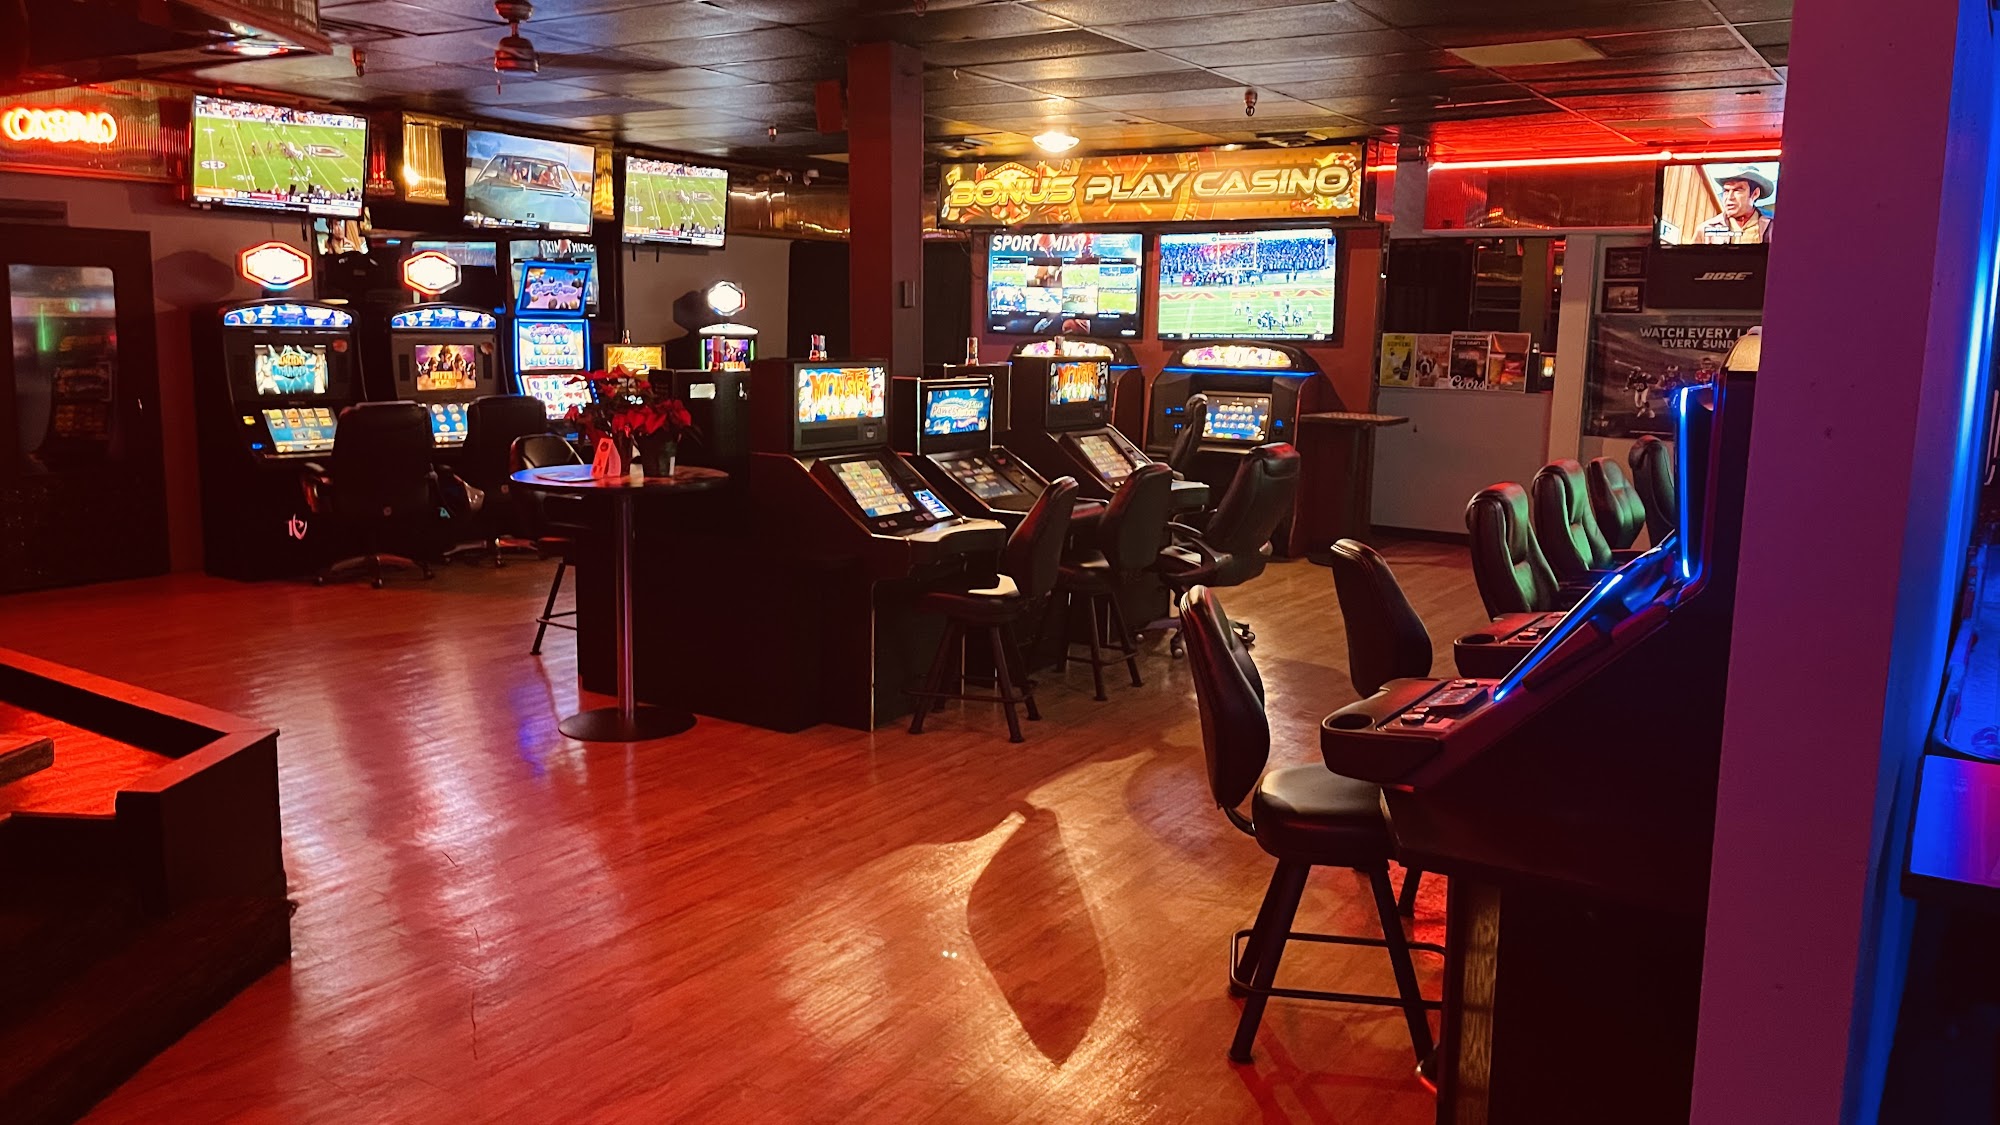 Shooters Sports Bar Grill & Casino